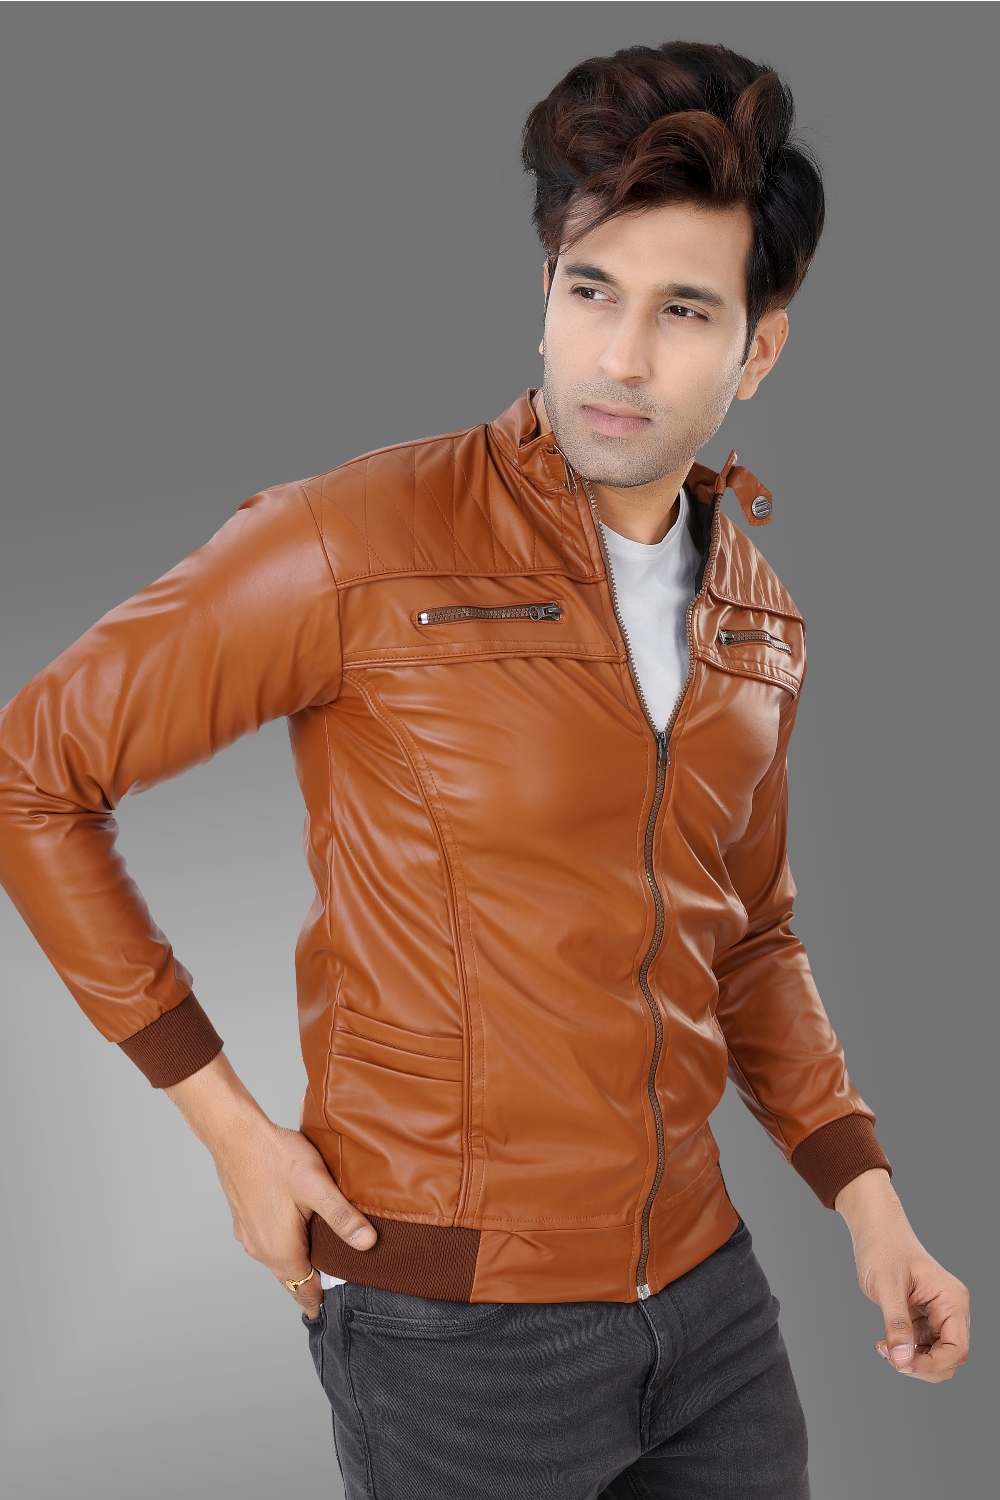 Buy Kandy casual pu jacket tan for mens Online @ ₹849 from ShopClues